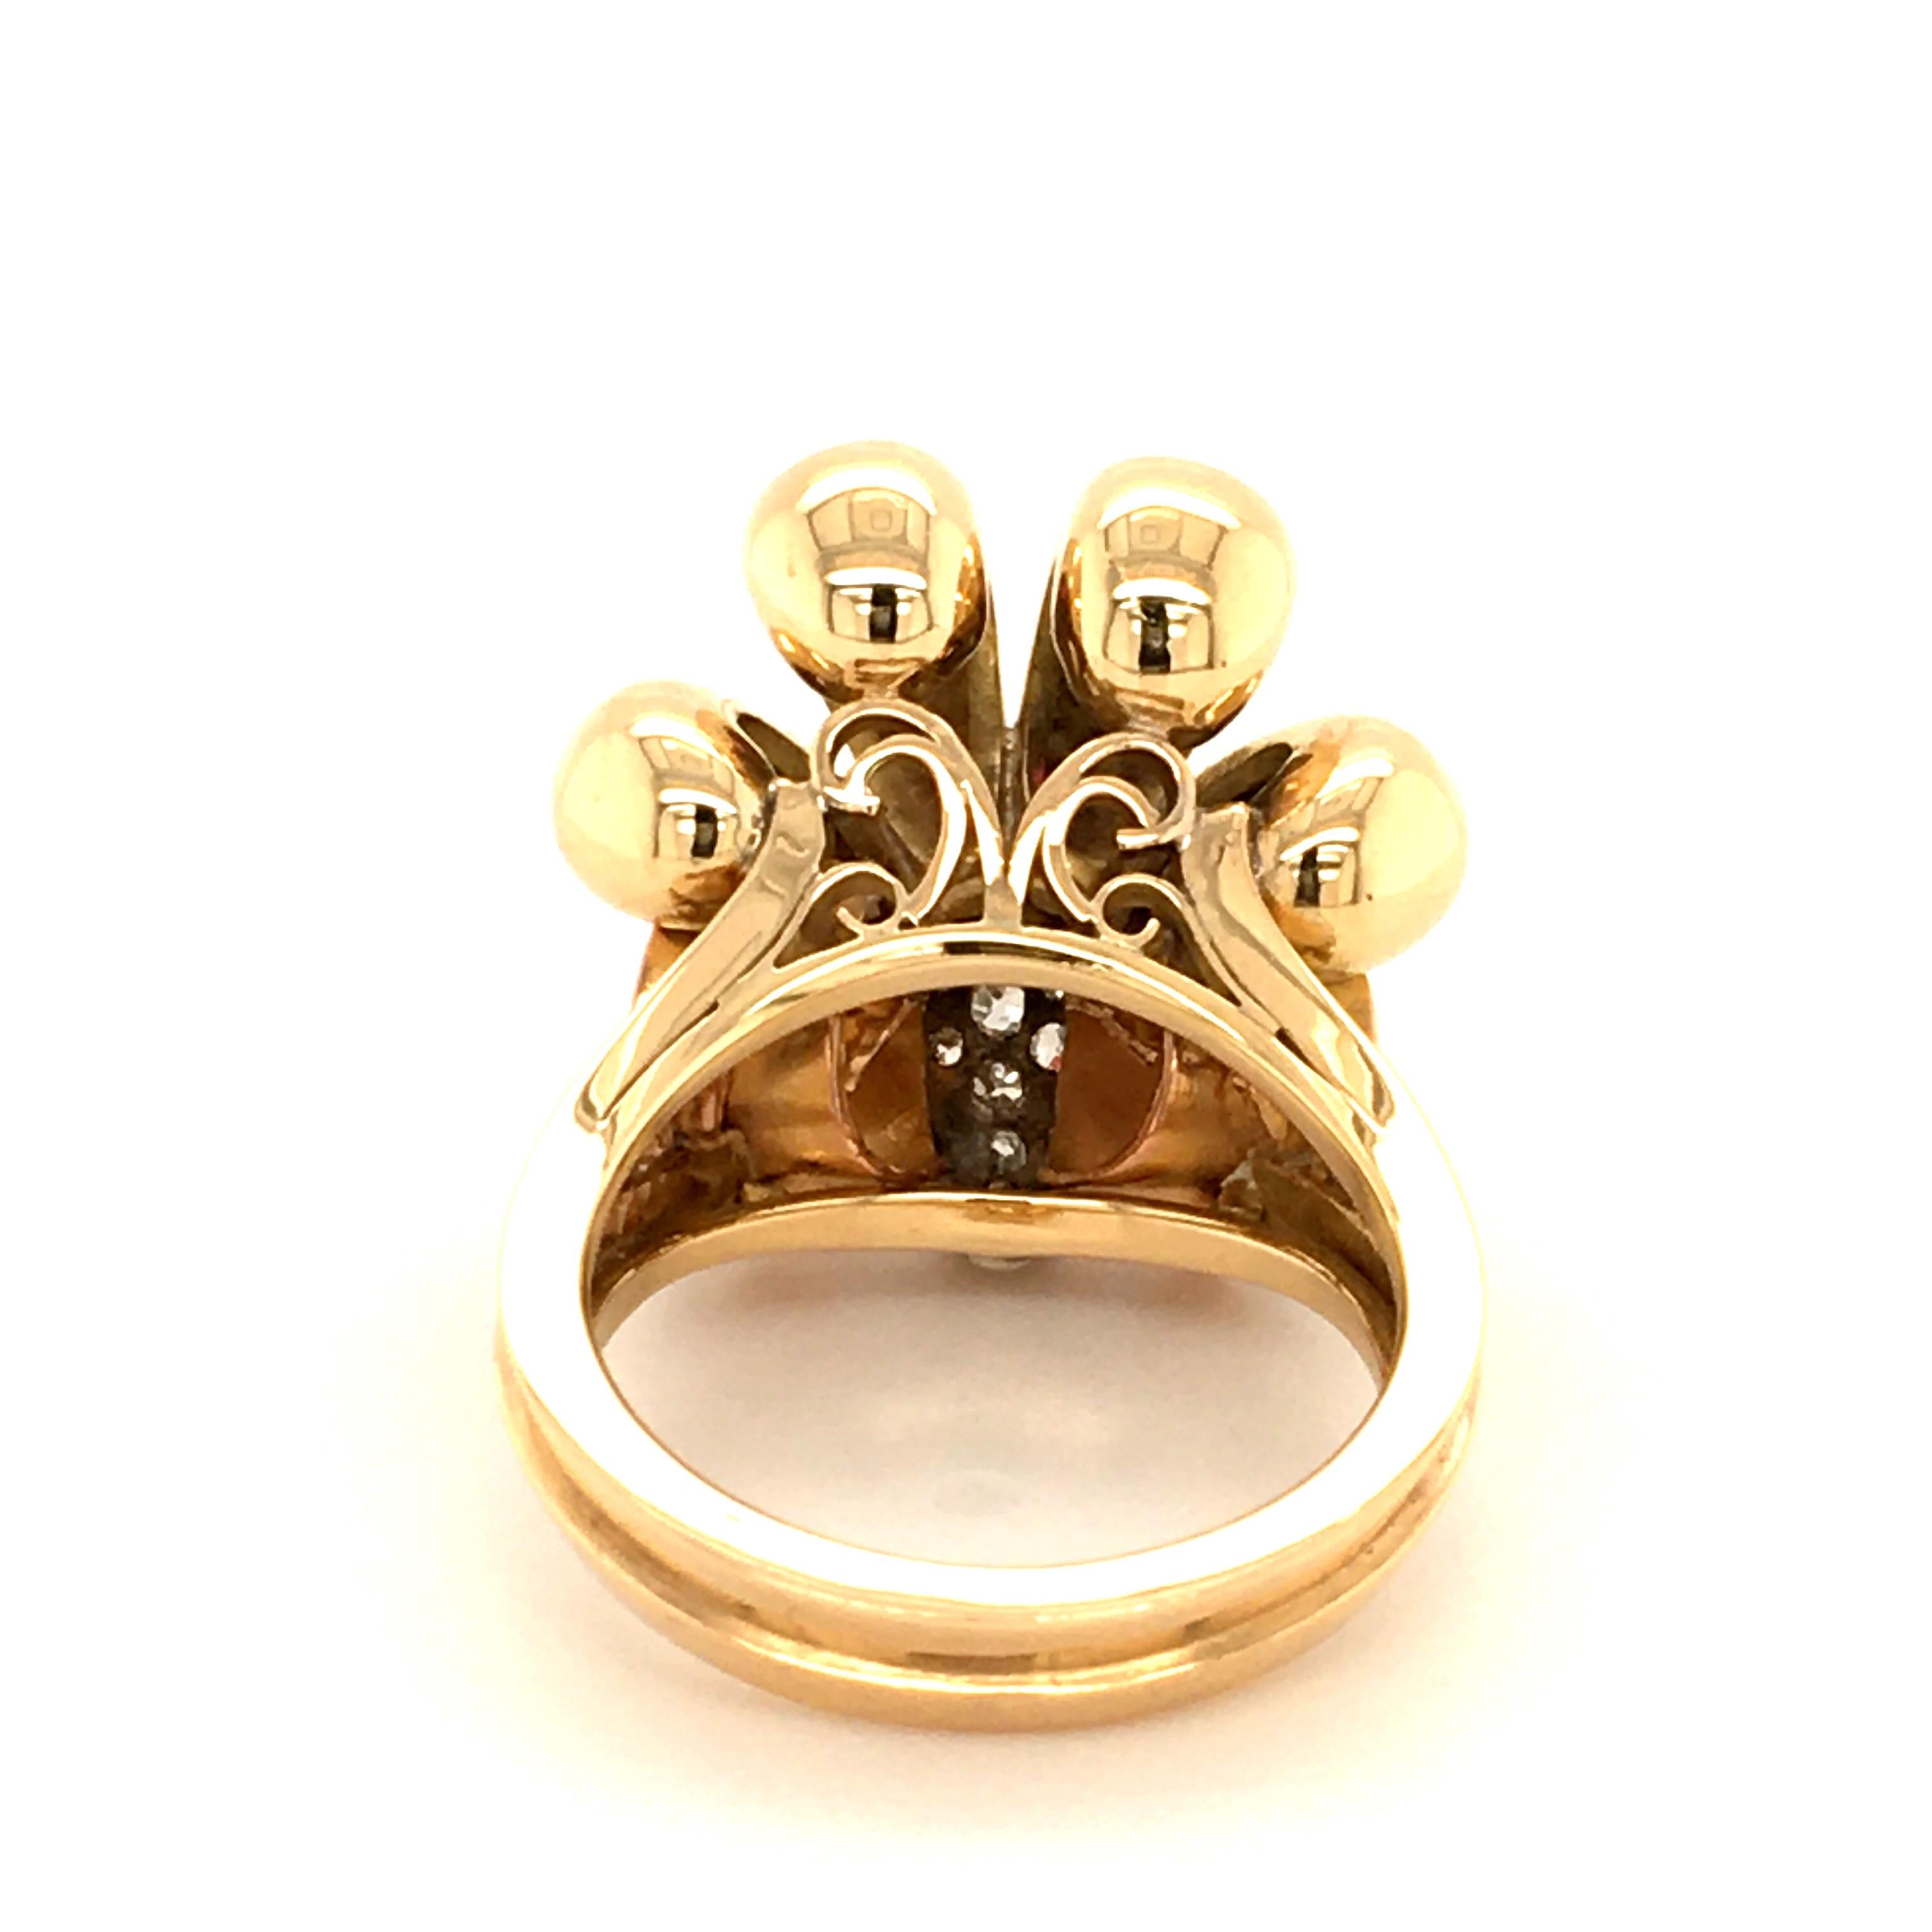 Women's or Men's Extraordinary Gold Ring with Rubys and Oldcut Diamonds